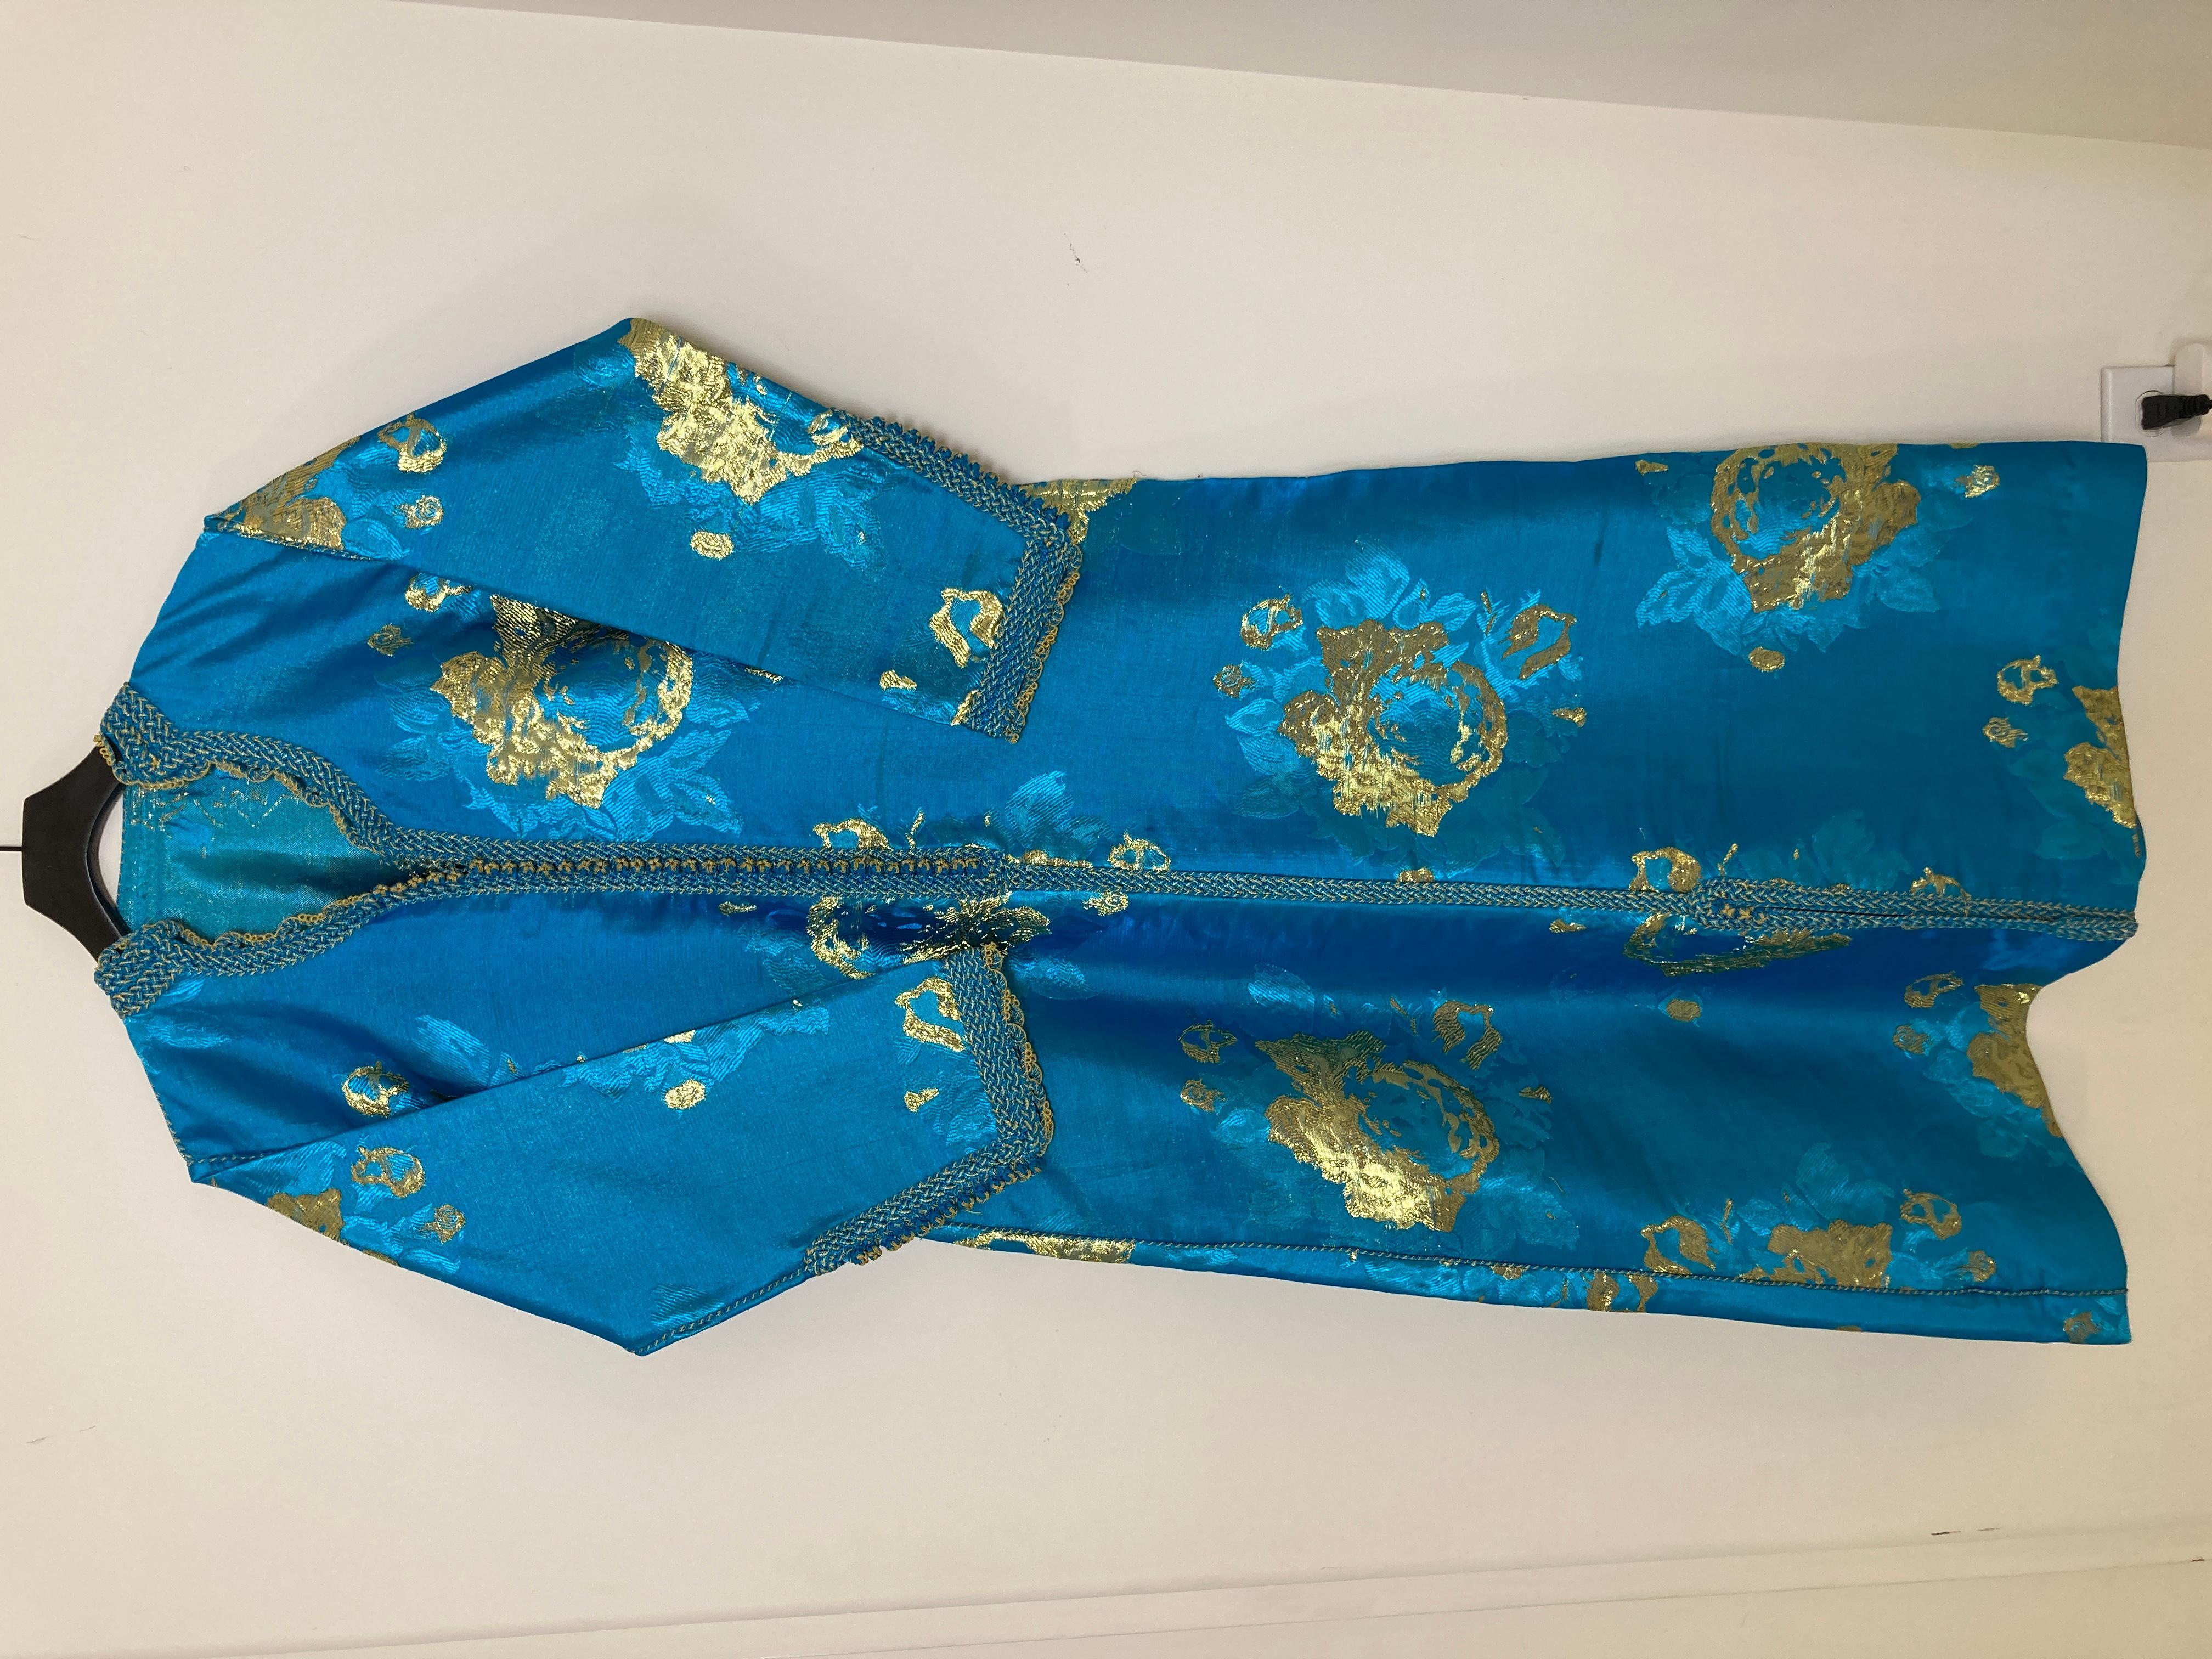 Moroccan Kaftan in Turquoise and Gold Floral Brocade Metallic Lame 13